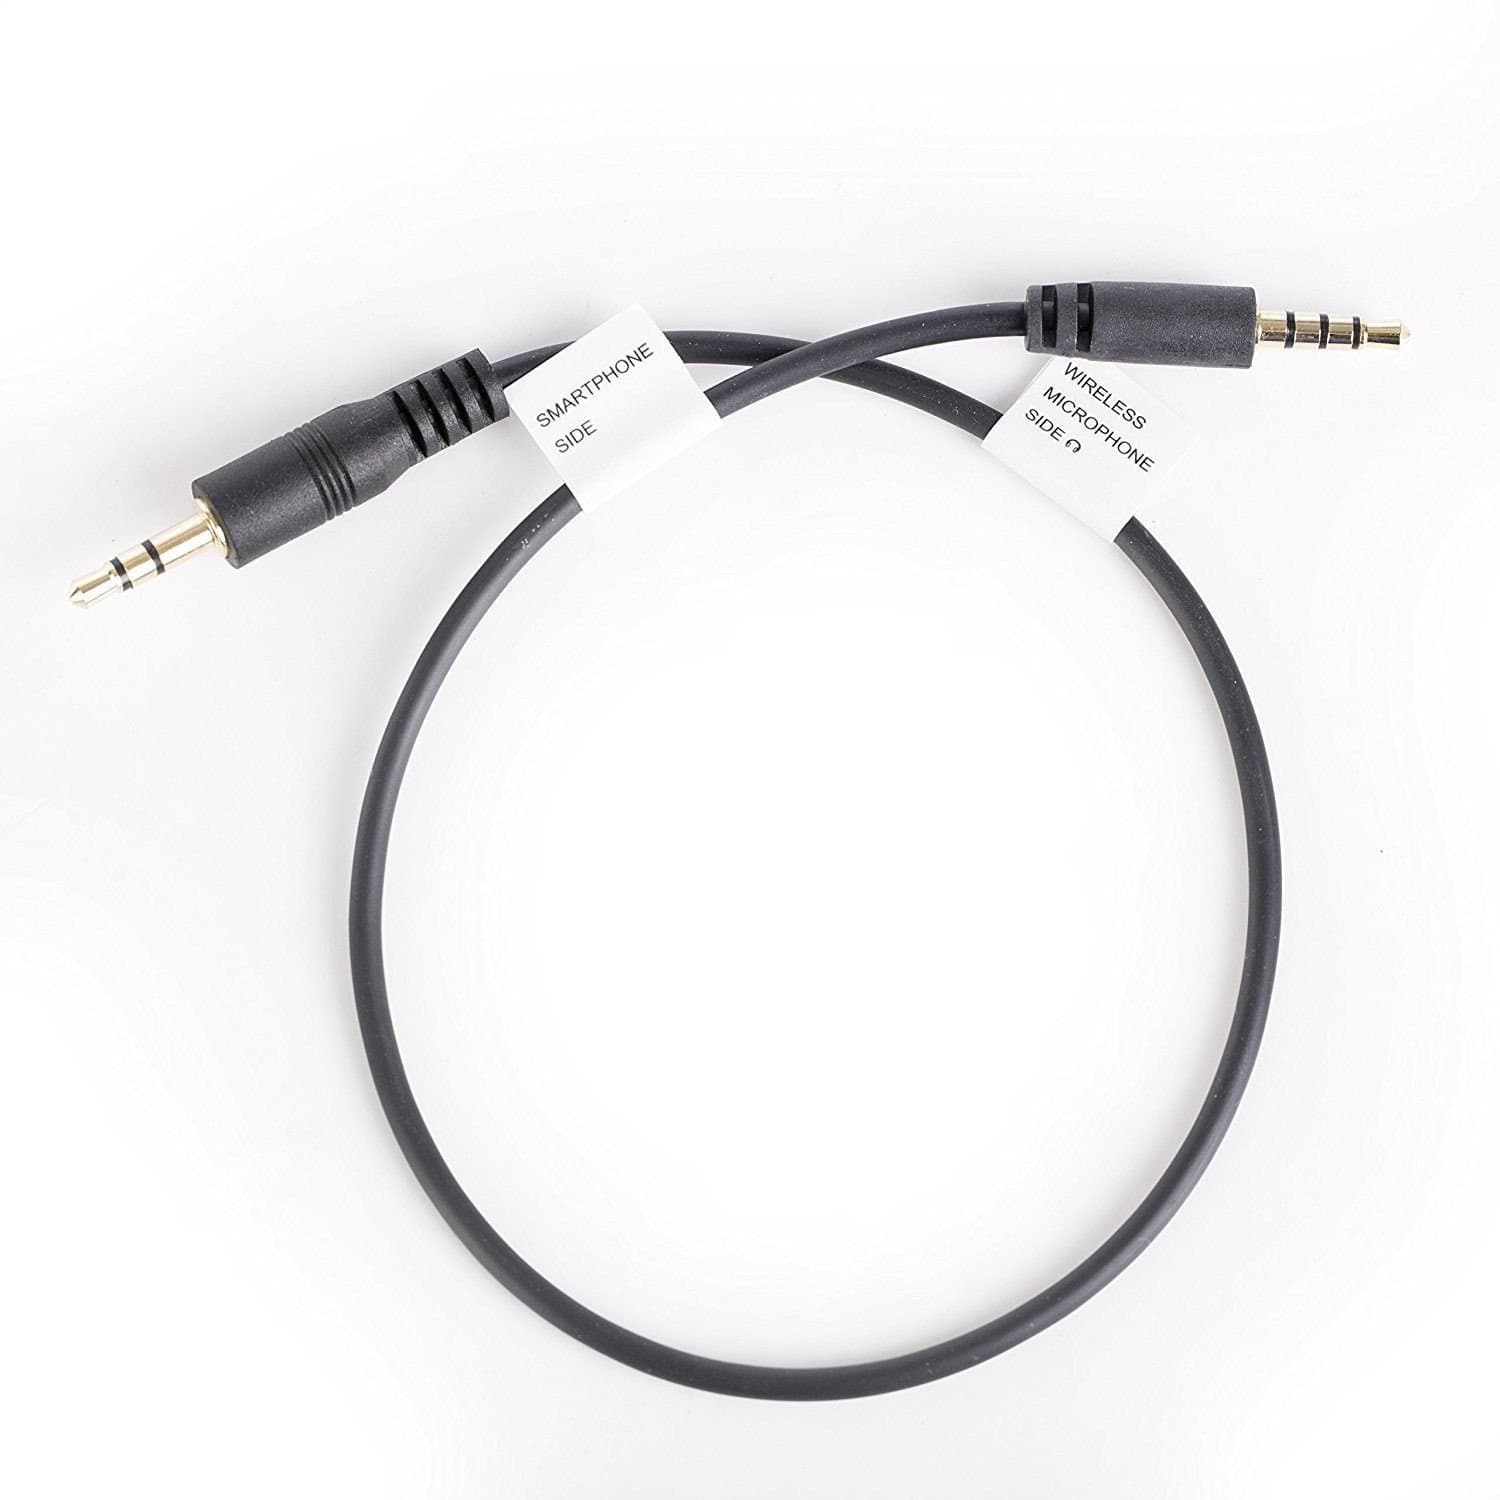 3.5mm TRS Mic to TRRS Adapter Cable for Smartphones | Movo